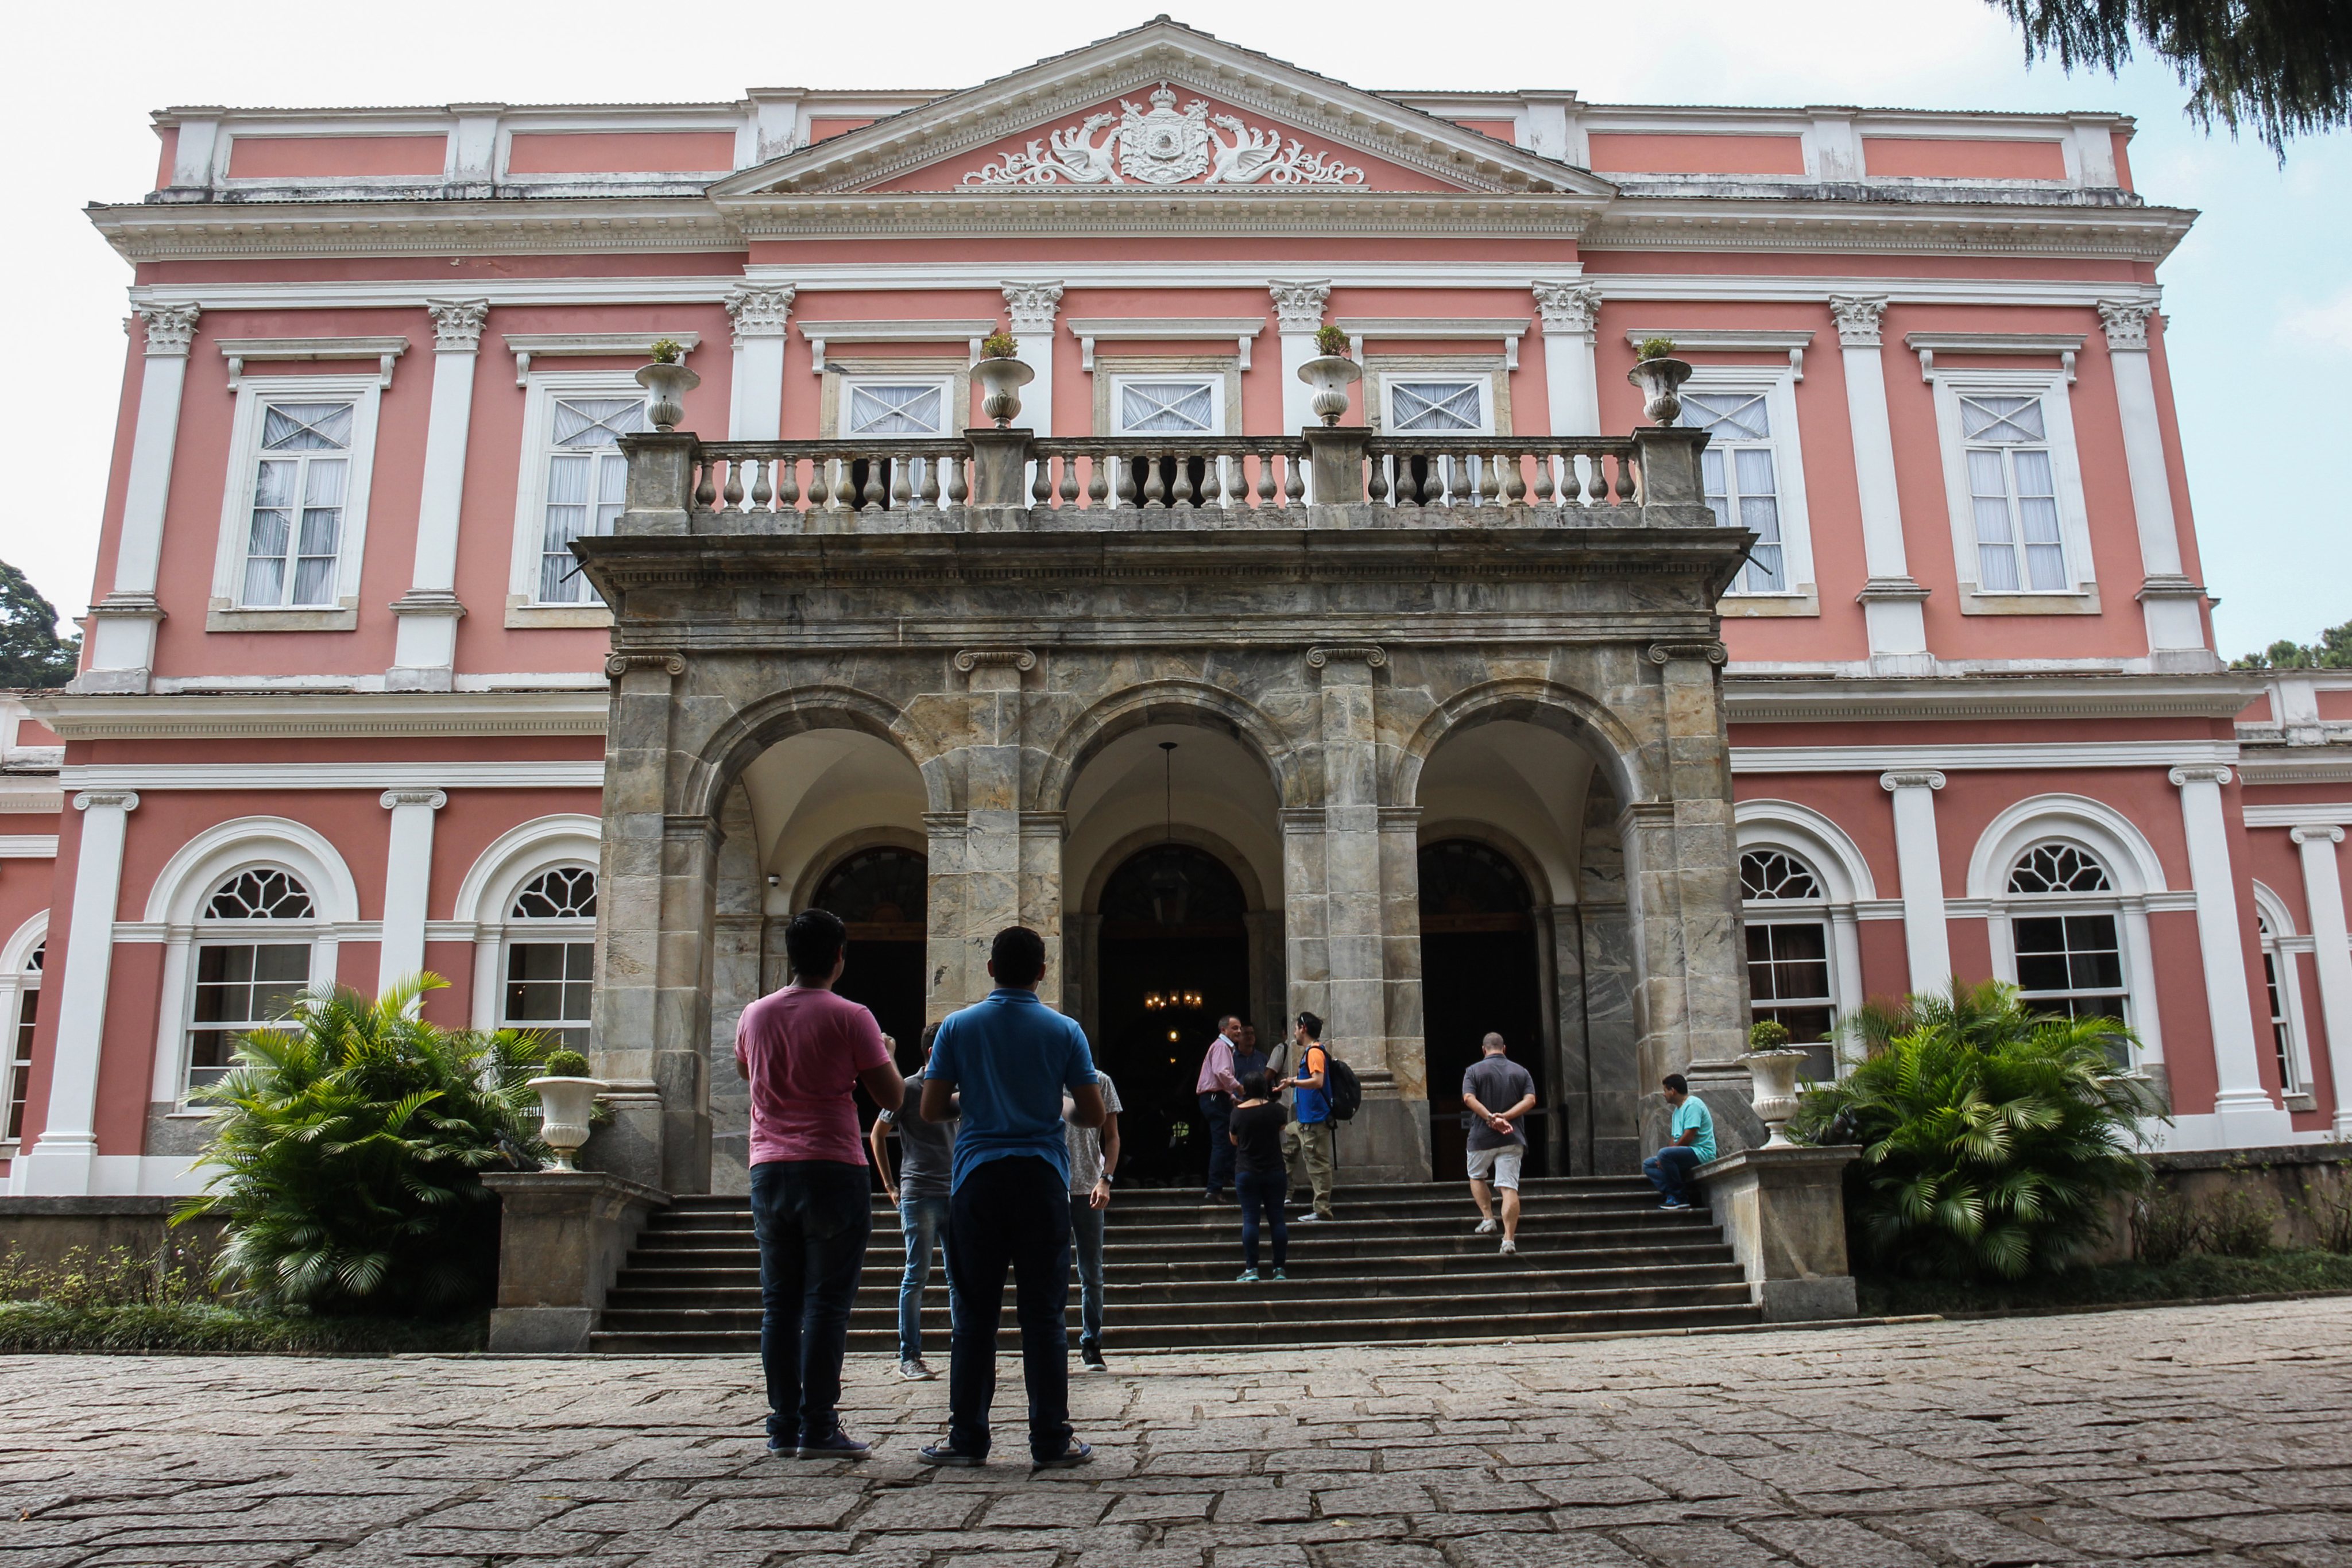 Petropolis city has strong links to the german culture